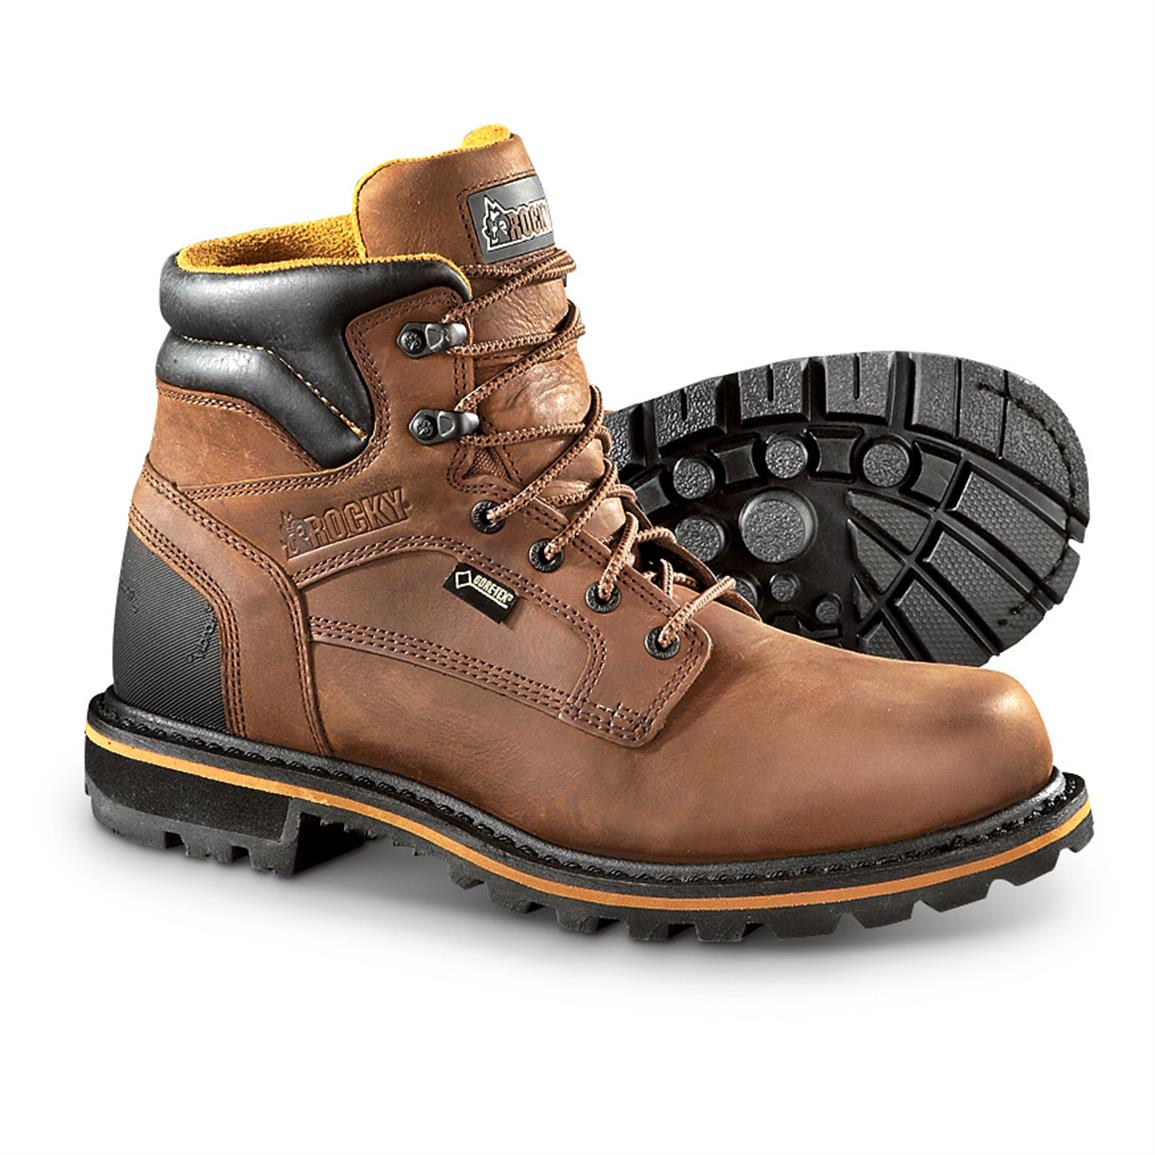 Rocky Governor GORE-TEX Waterproof, Breathable Work Boots - 637913 ...